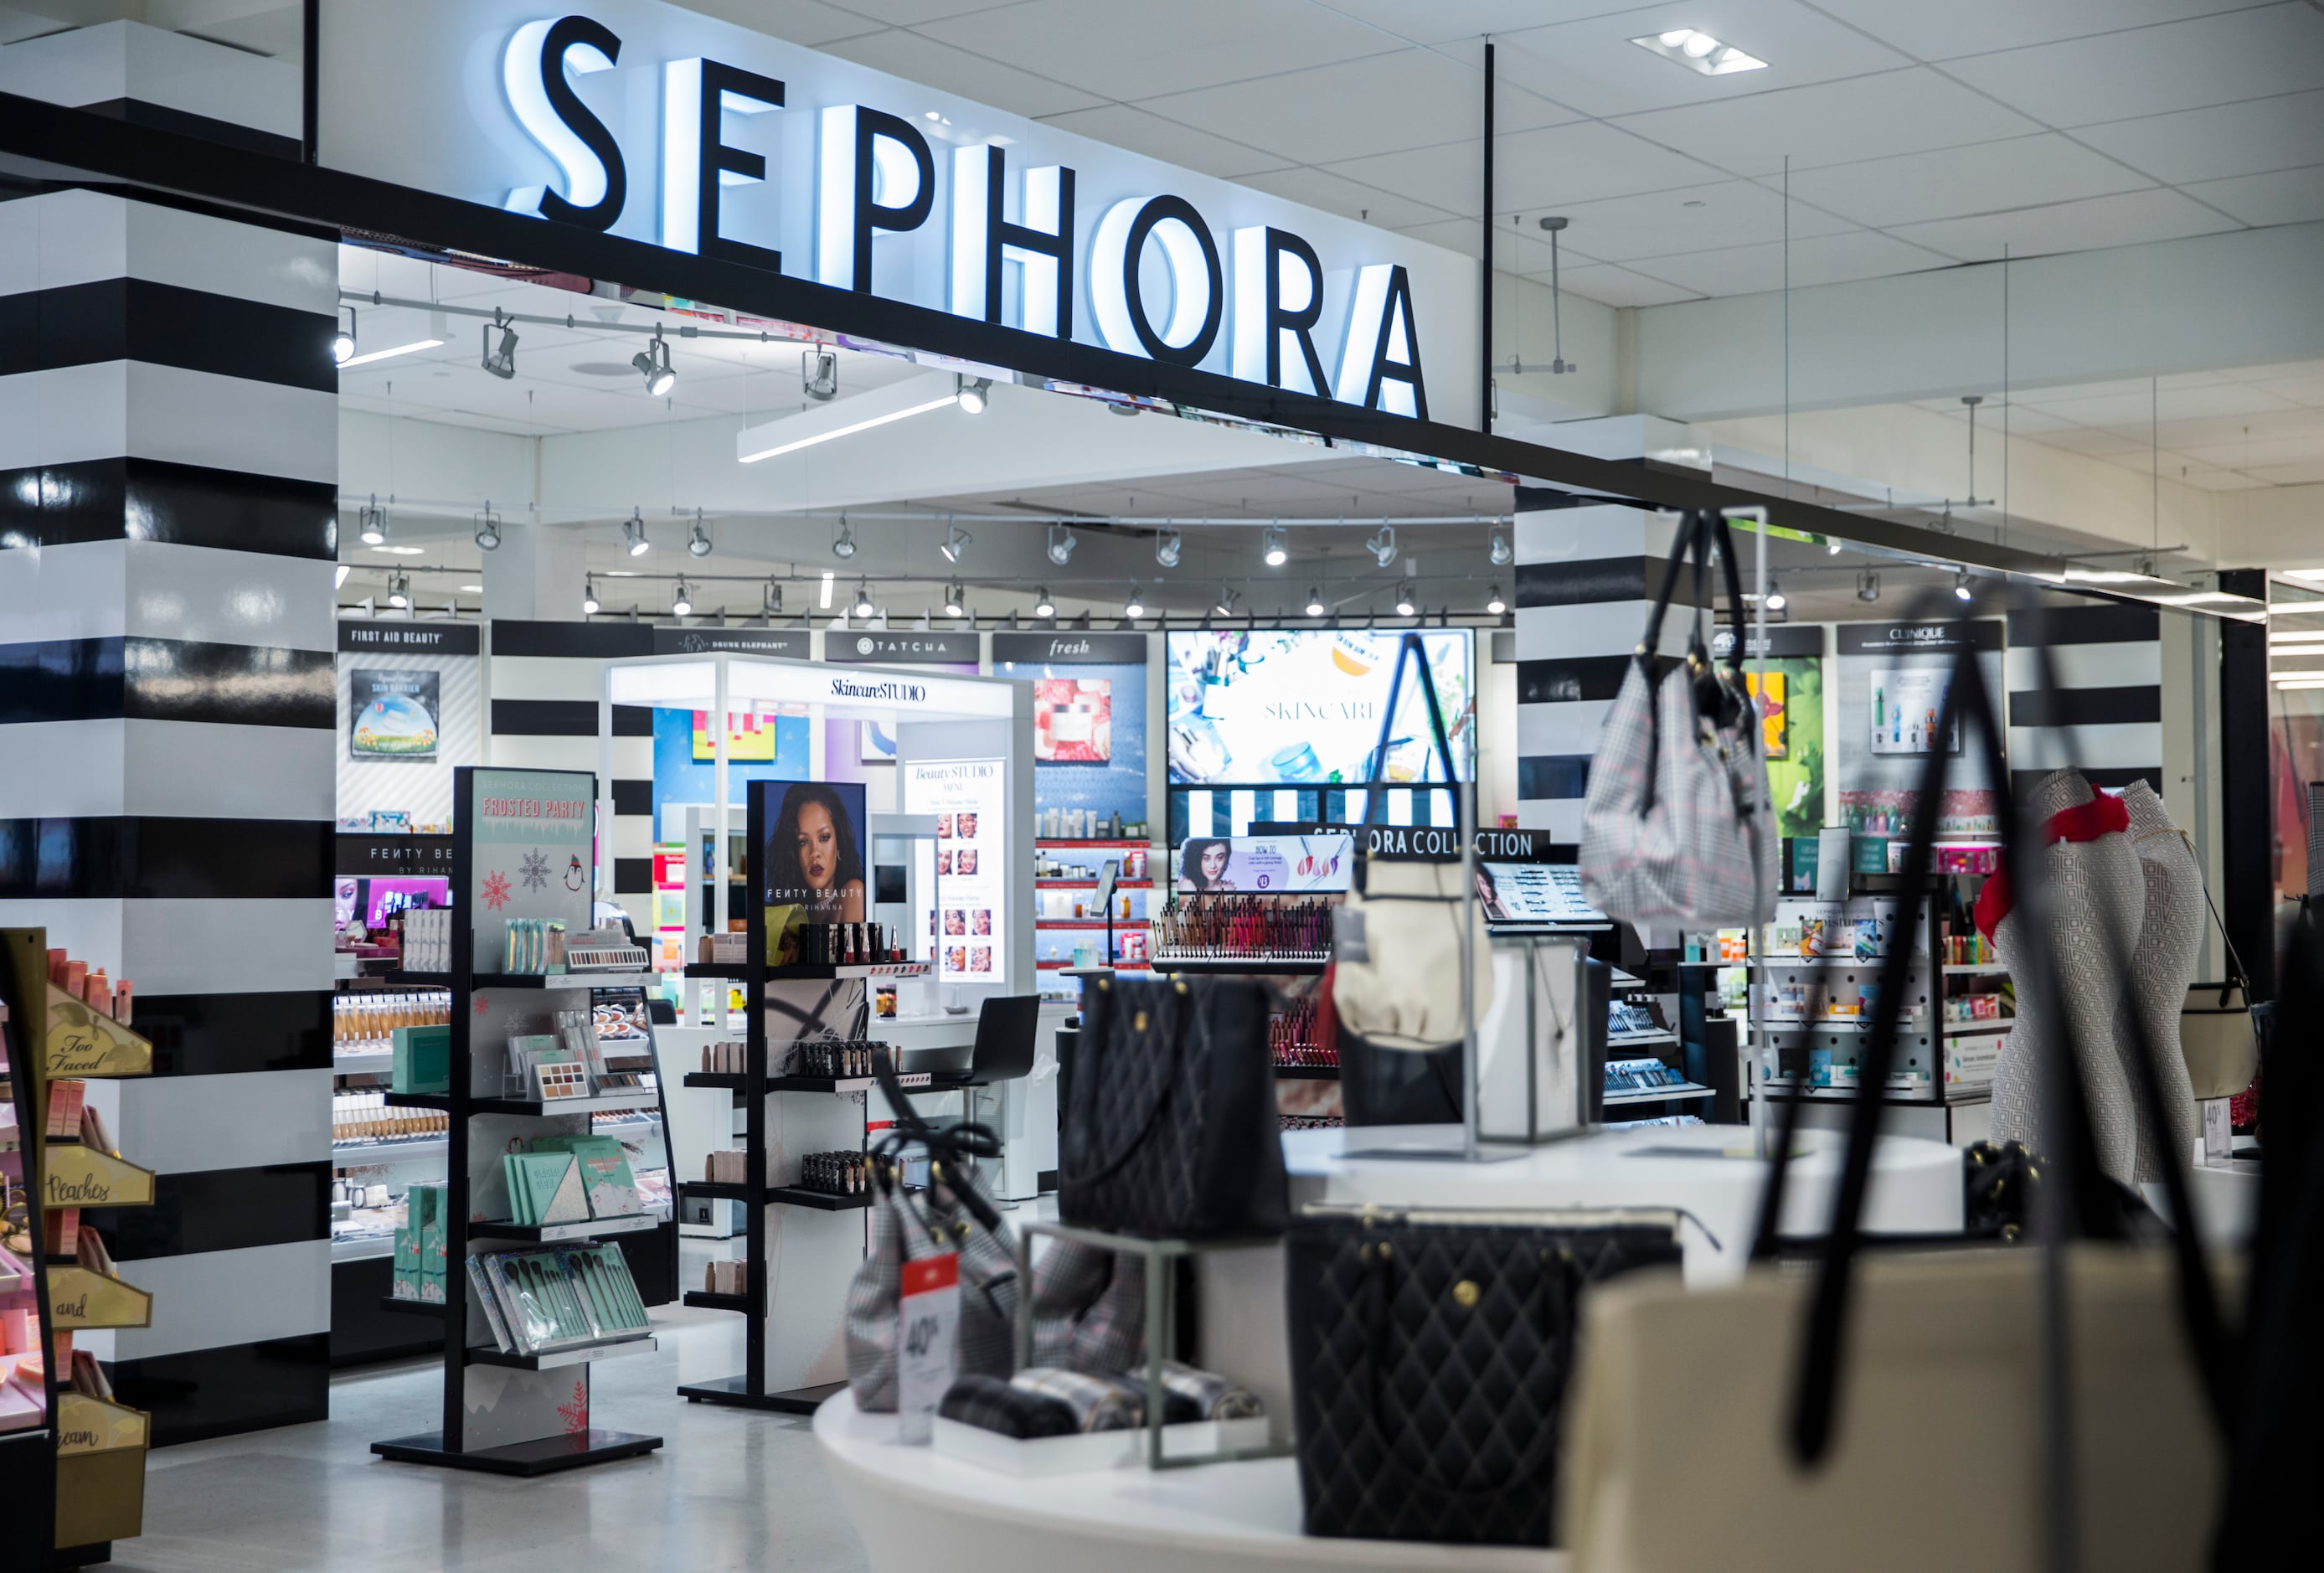 JCPenney Expands Partnership With Sephora - Retail TouchPoints